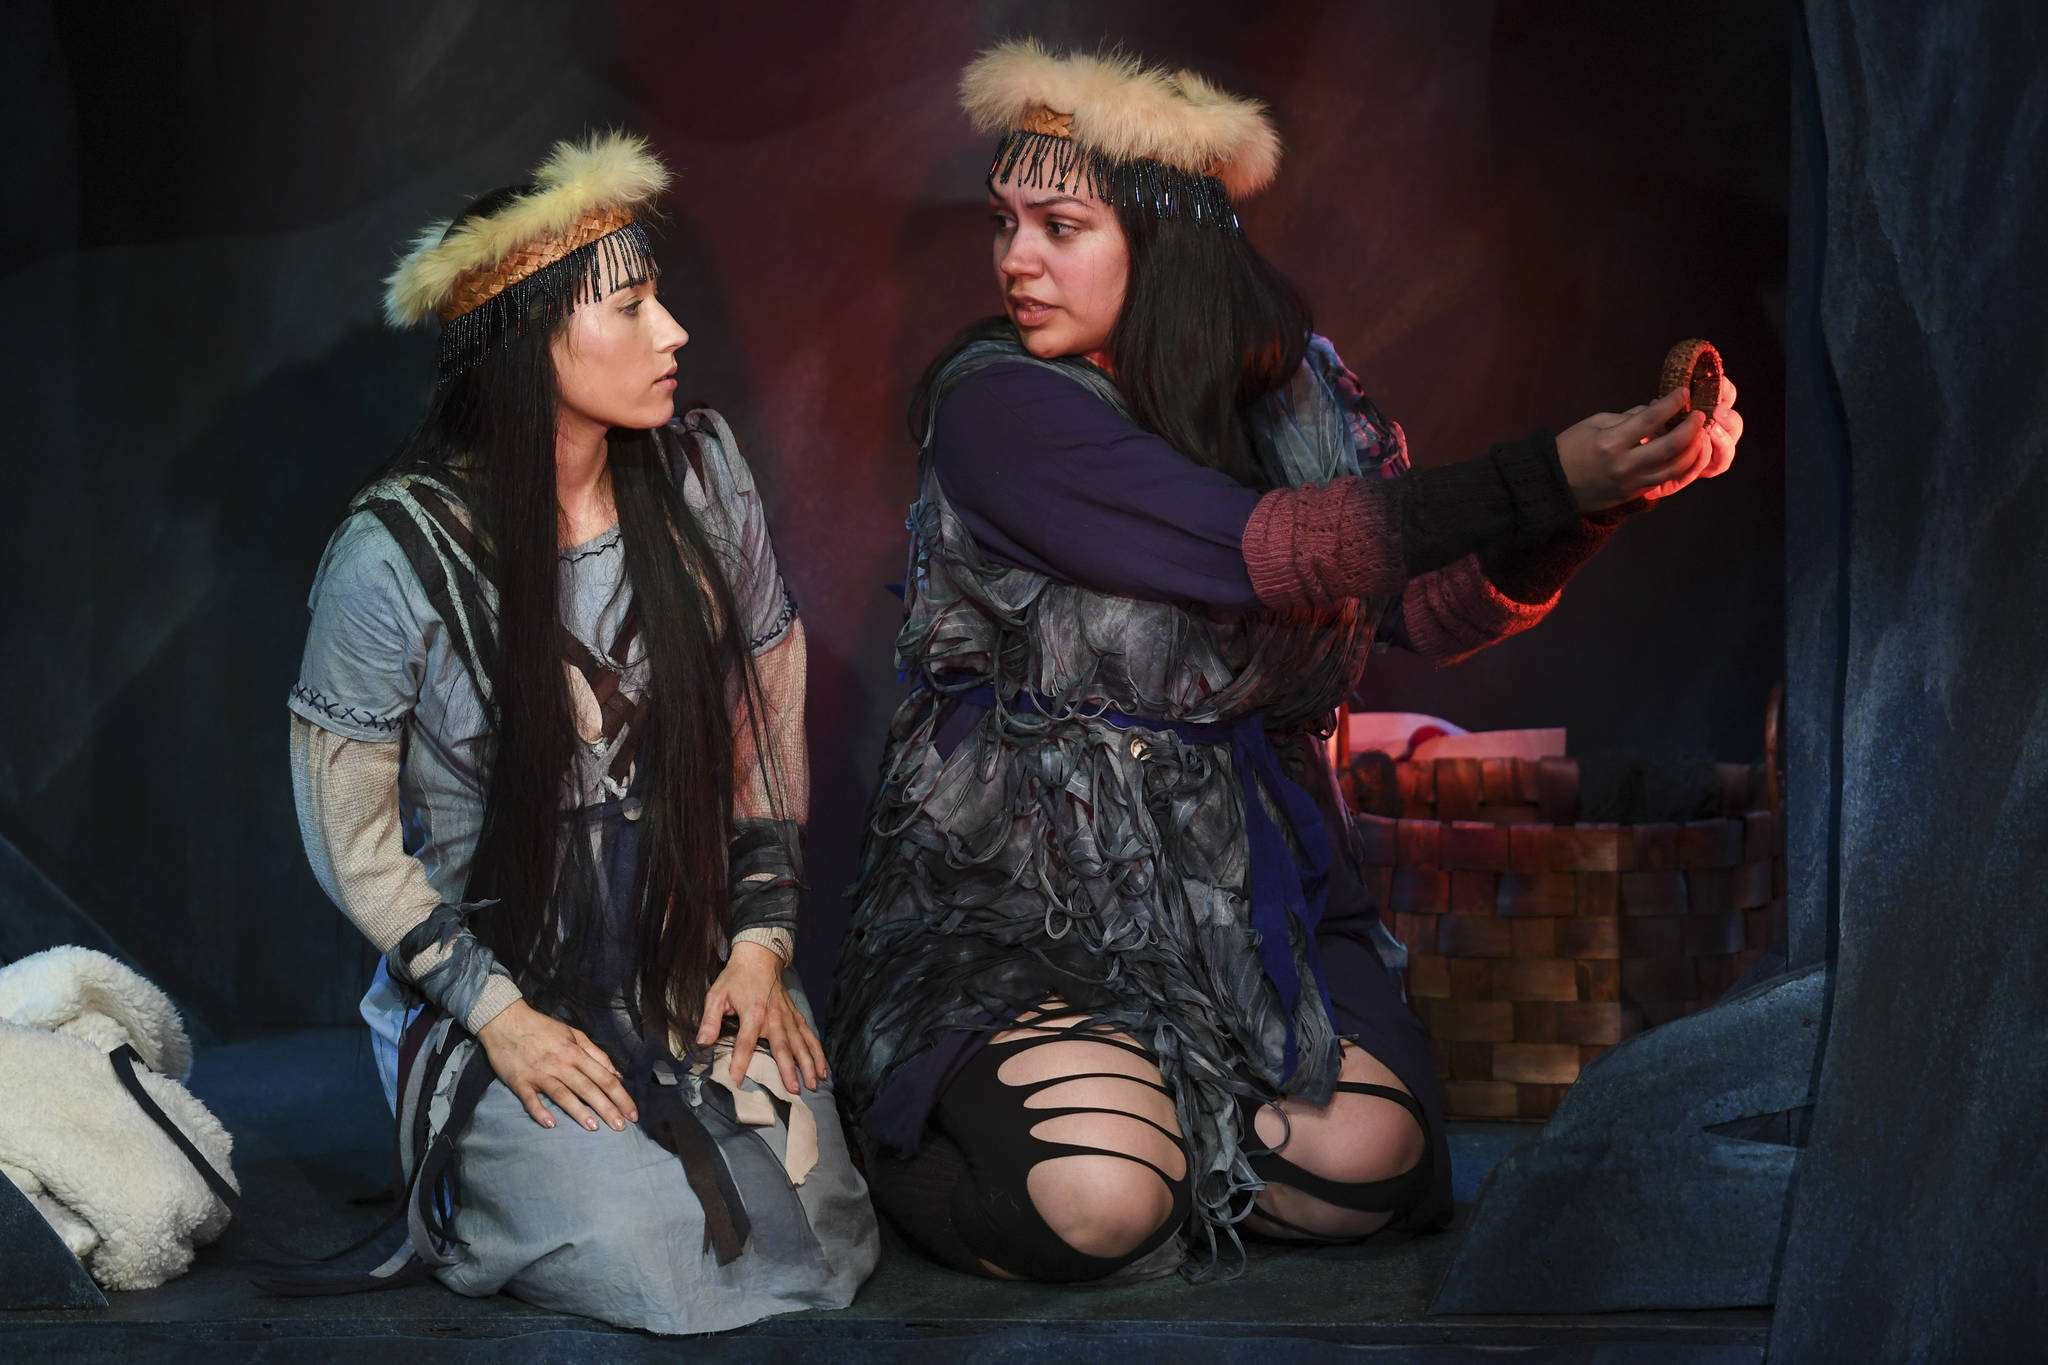 Photos: Behind the scenes of ‘Devilfish’, a new play of an old Tlingit tale